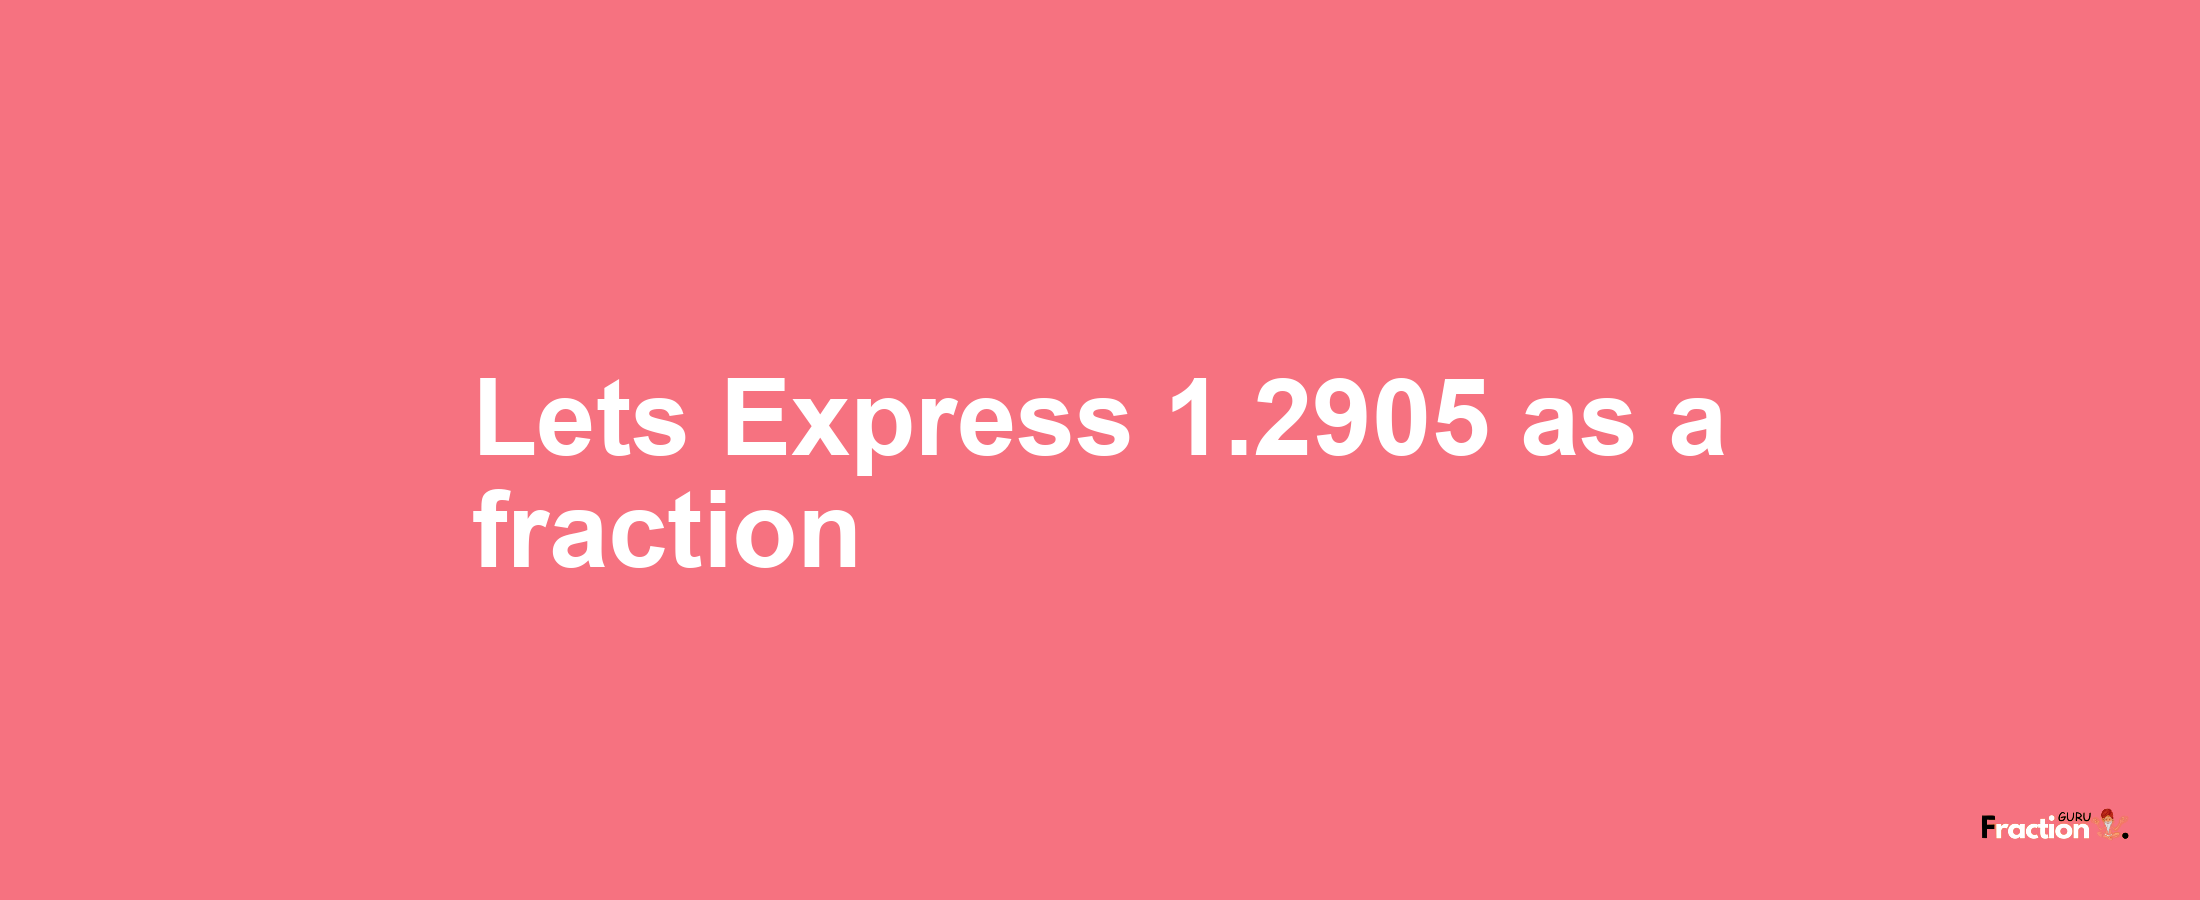 Lets Express 1.2905 as afraction